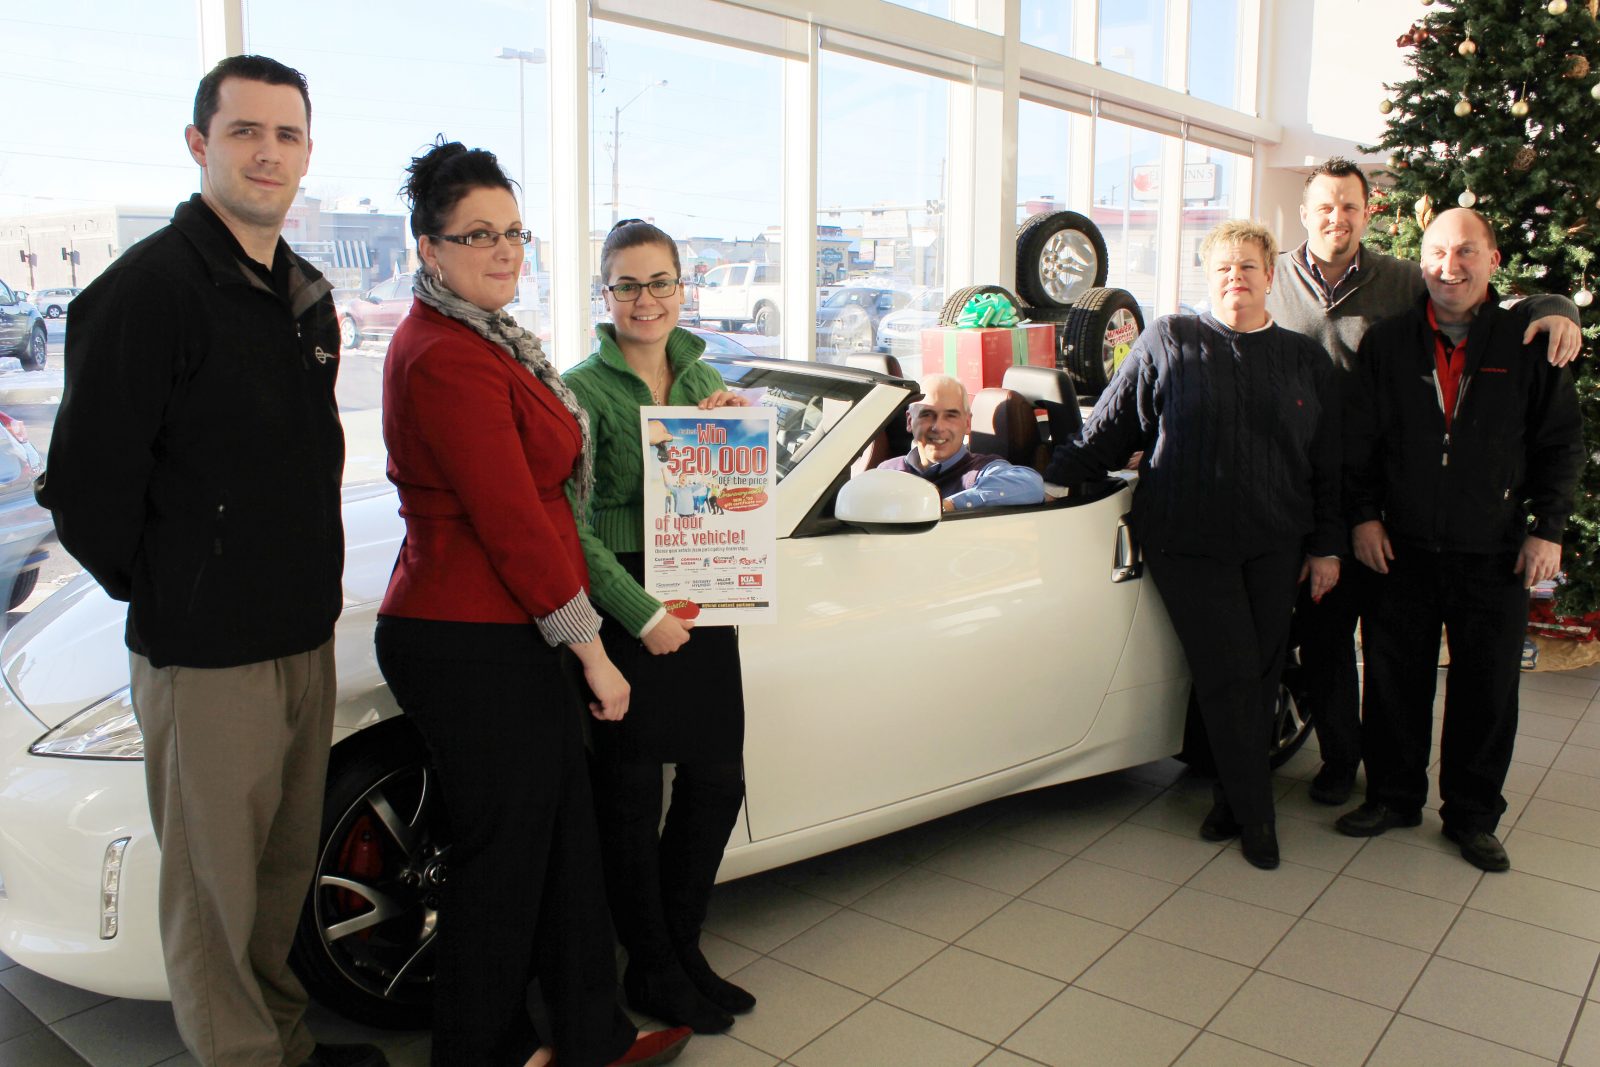 CORNWALL NISSAN: Keeping driver satisfaction in high gear